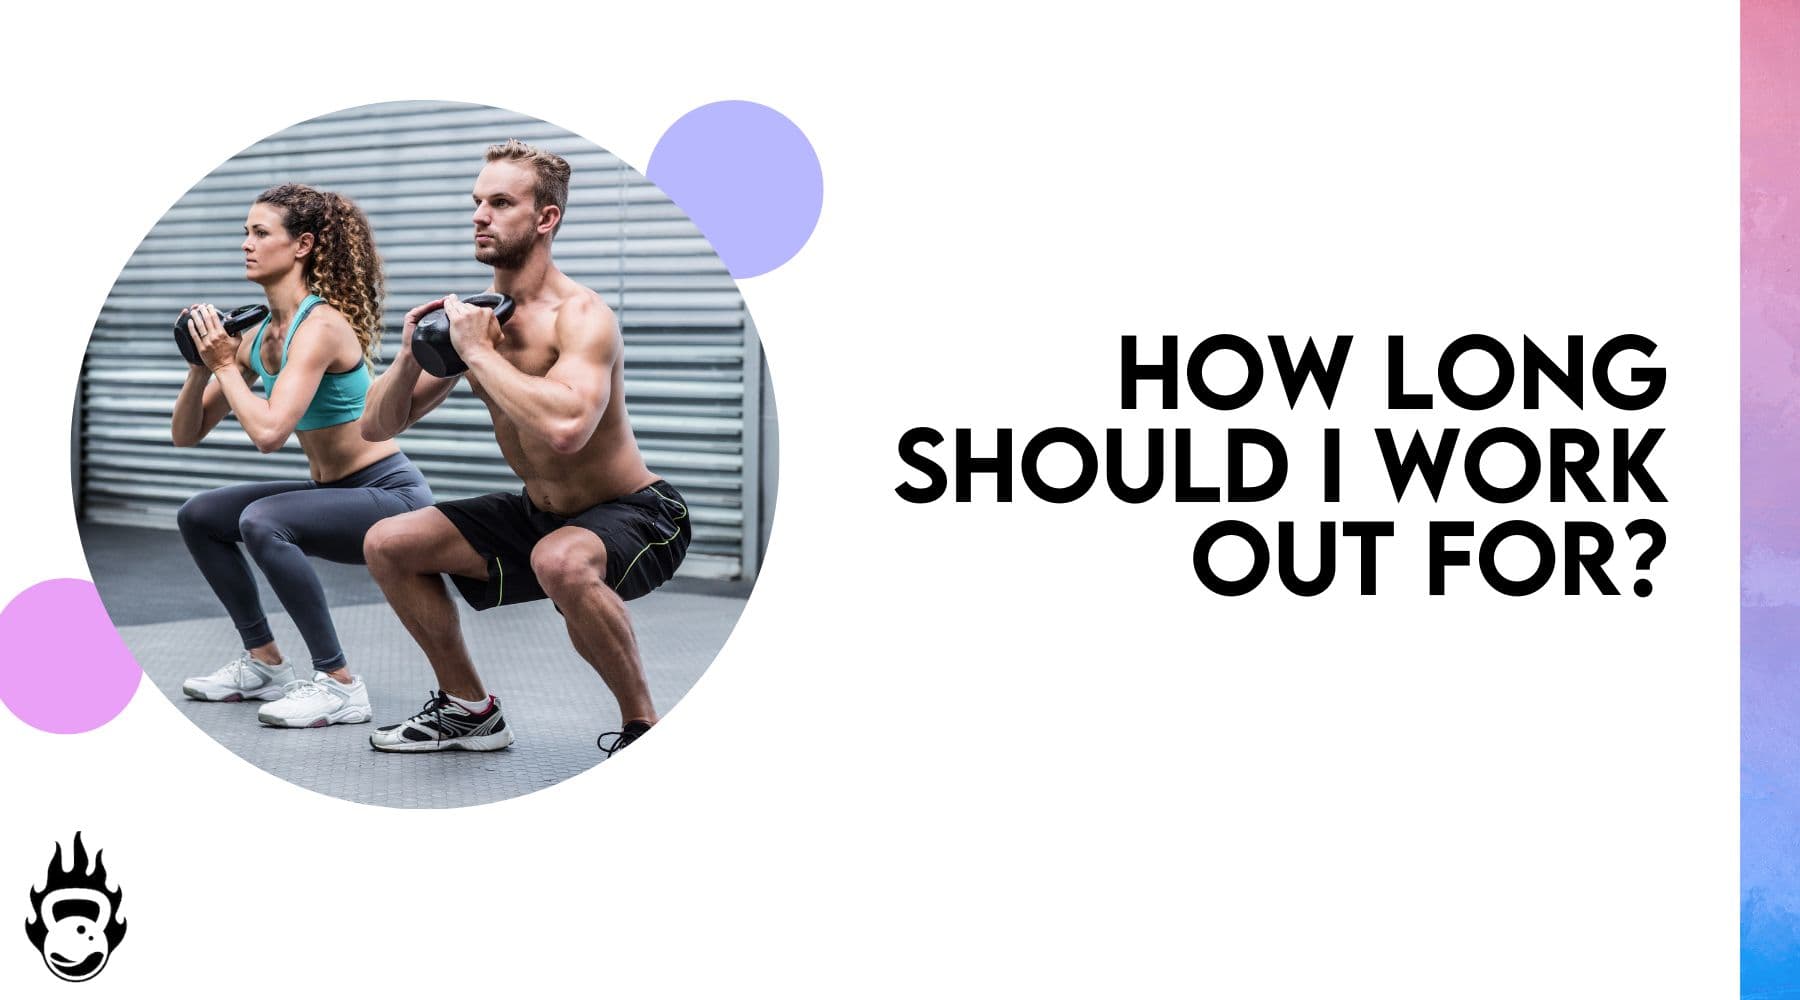 How Long Should I Work Out For?